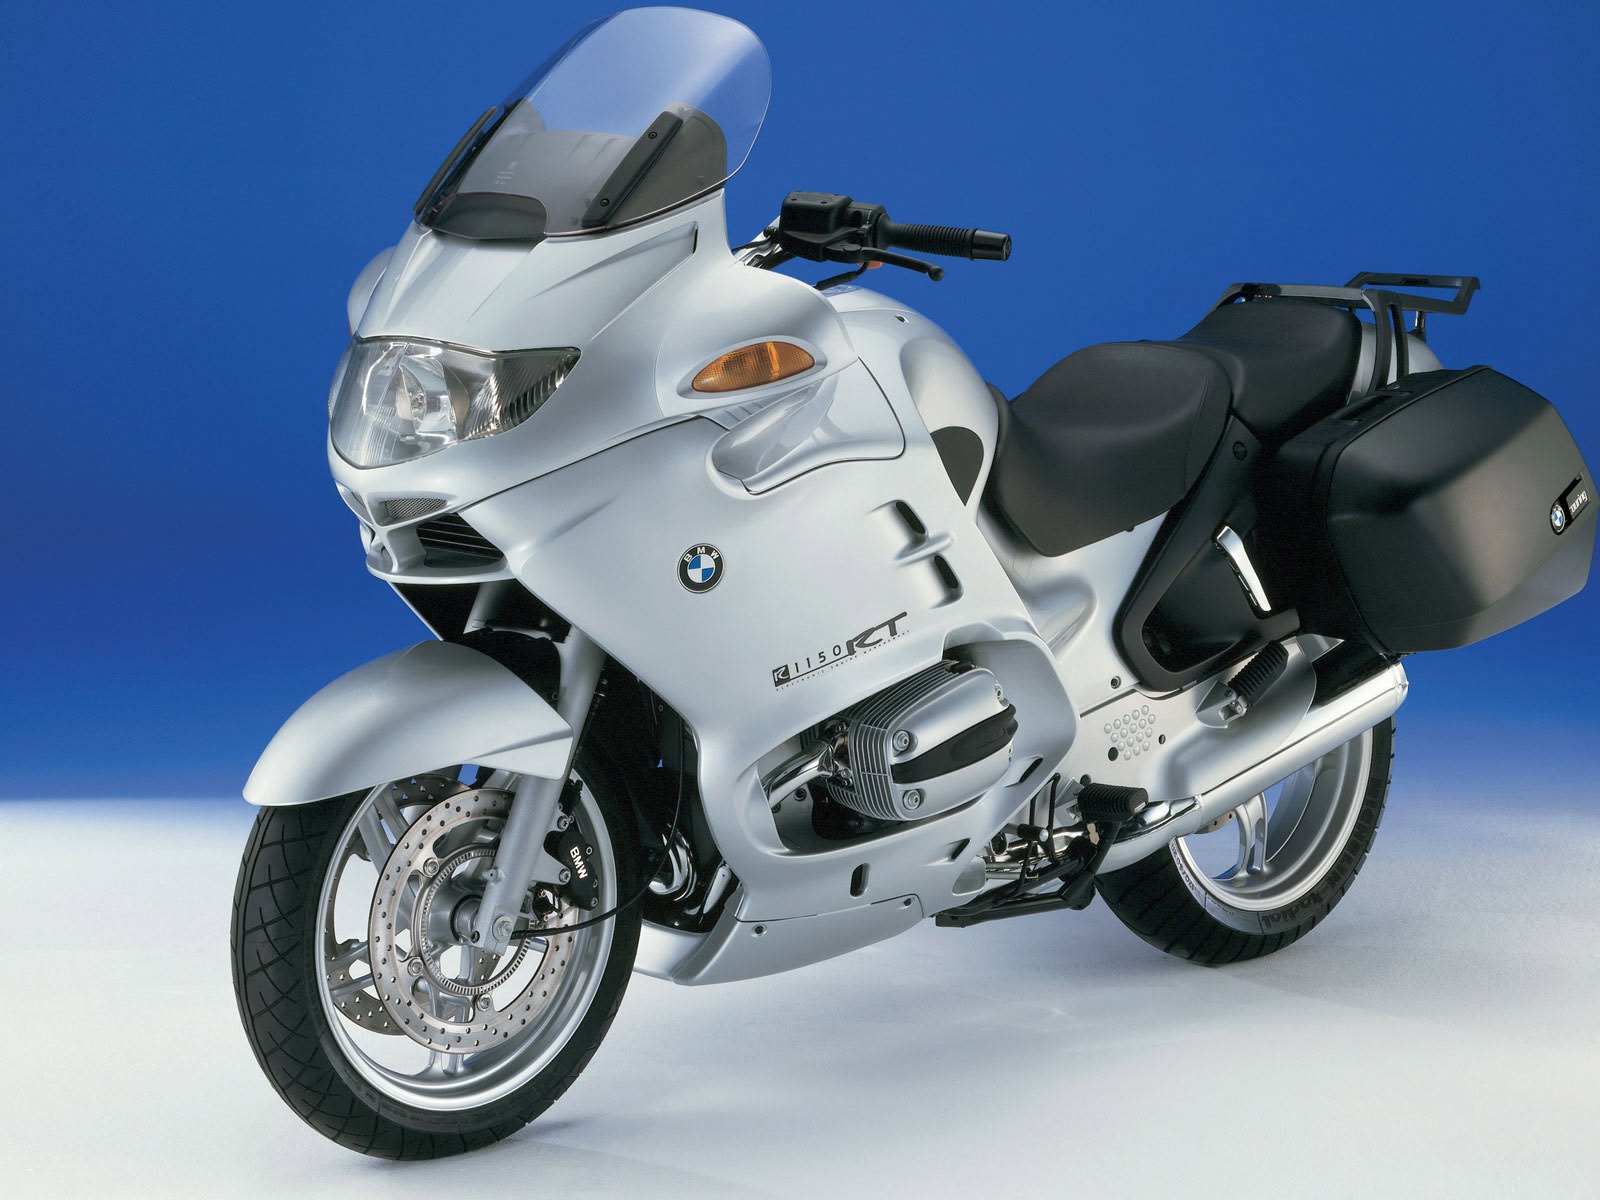 BMW motorcycle wallpapers (1) #12 - 1600x1200